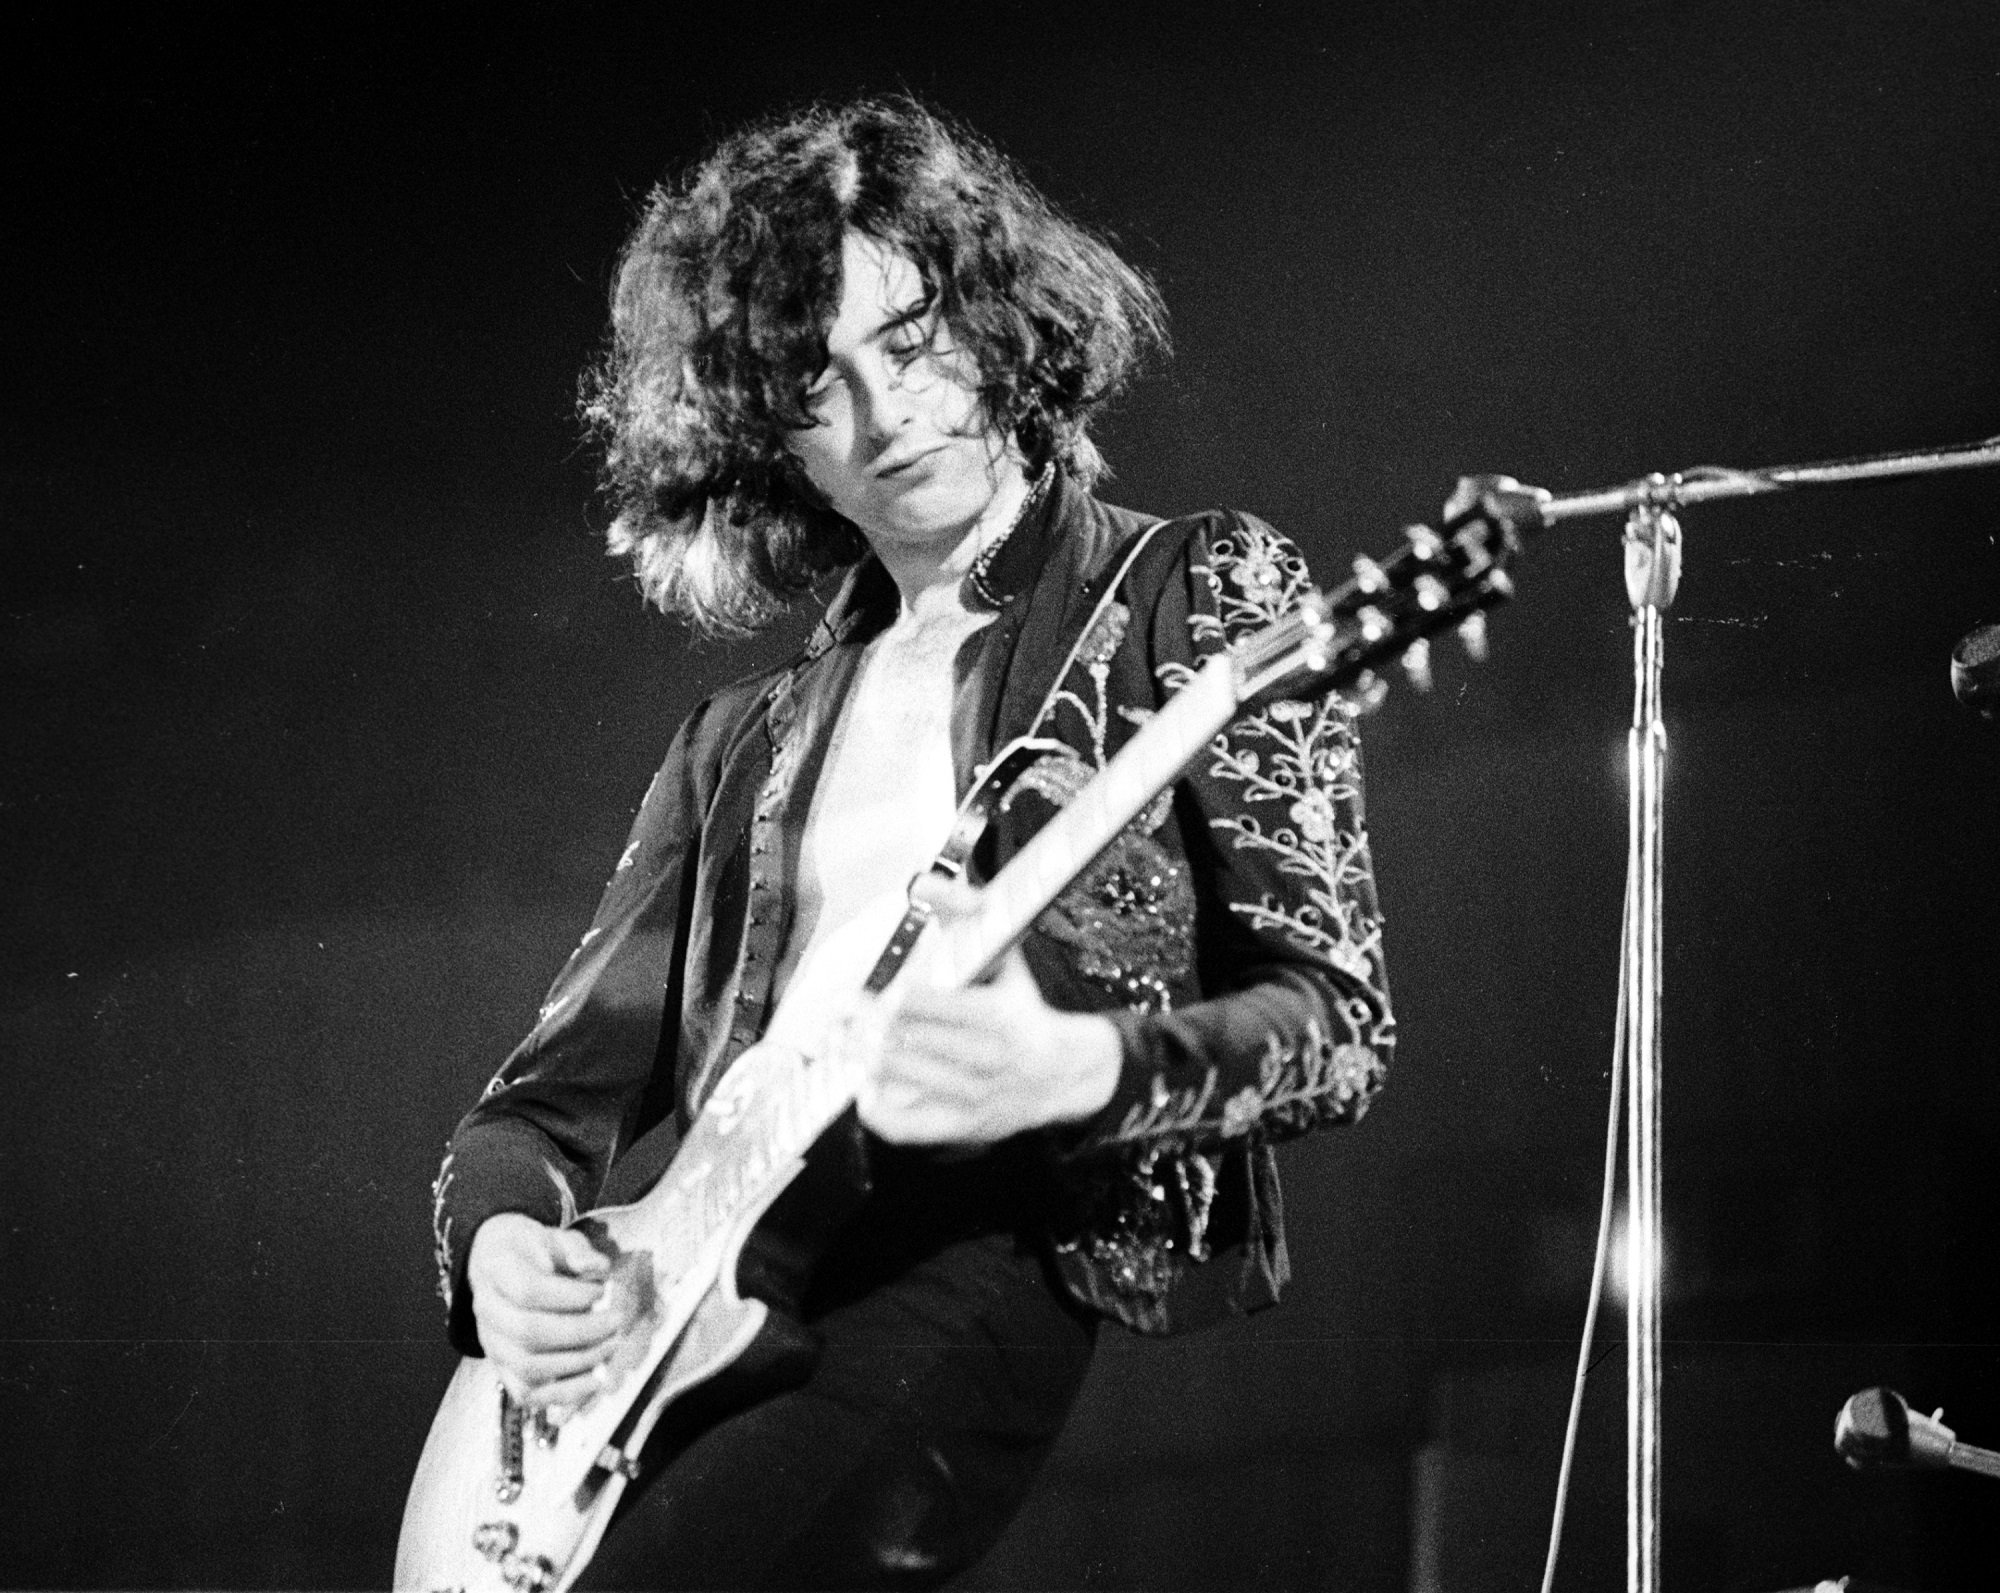 What Jimmy Page Discovered on a Missing ‘Early’ Demo Tape of ‘The Rain Song’